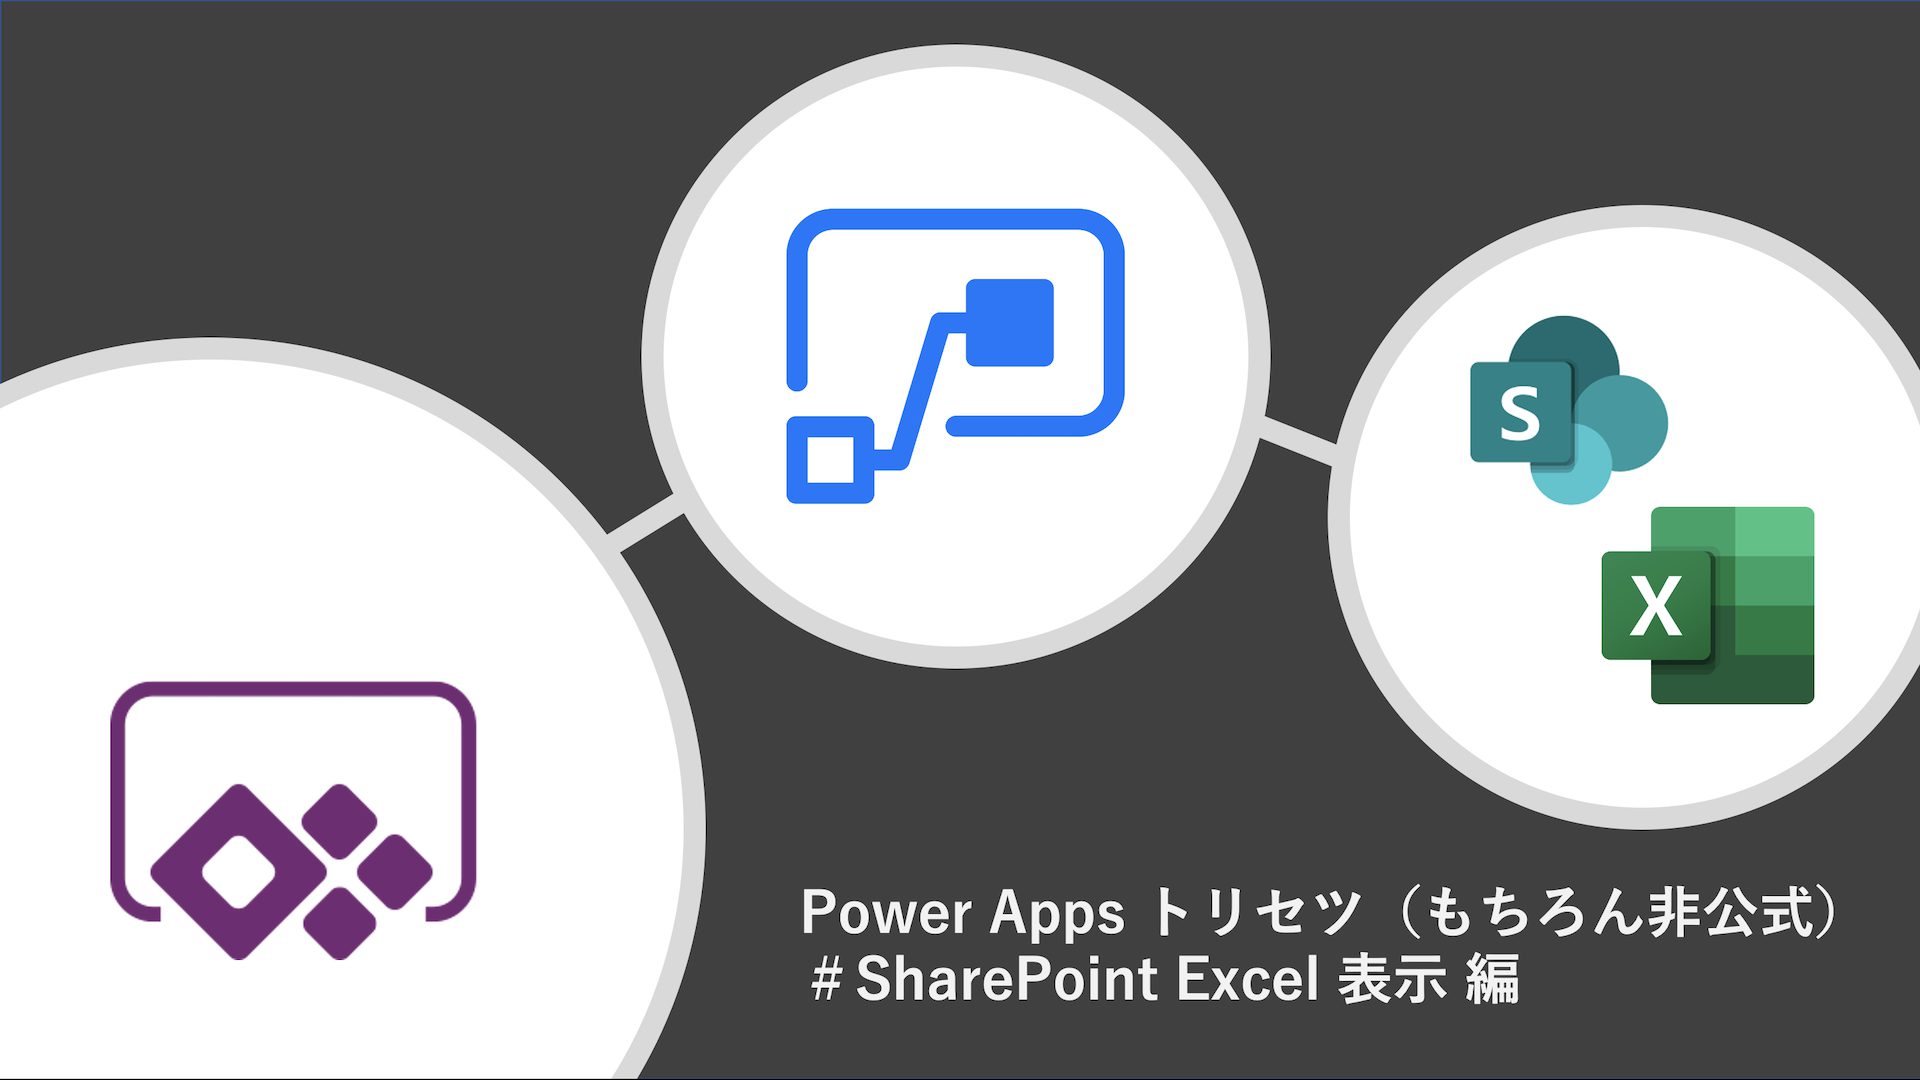 Power Apps のトリセツ（もちろん非公式）＃SharePoint Excel 表示編